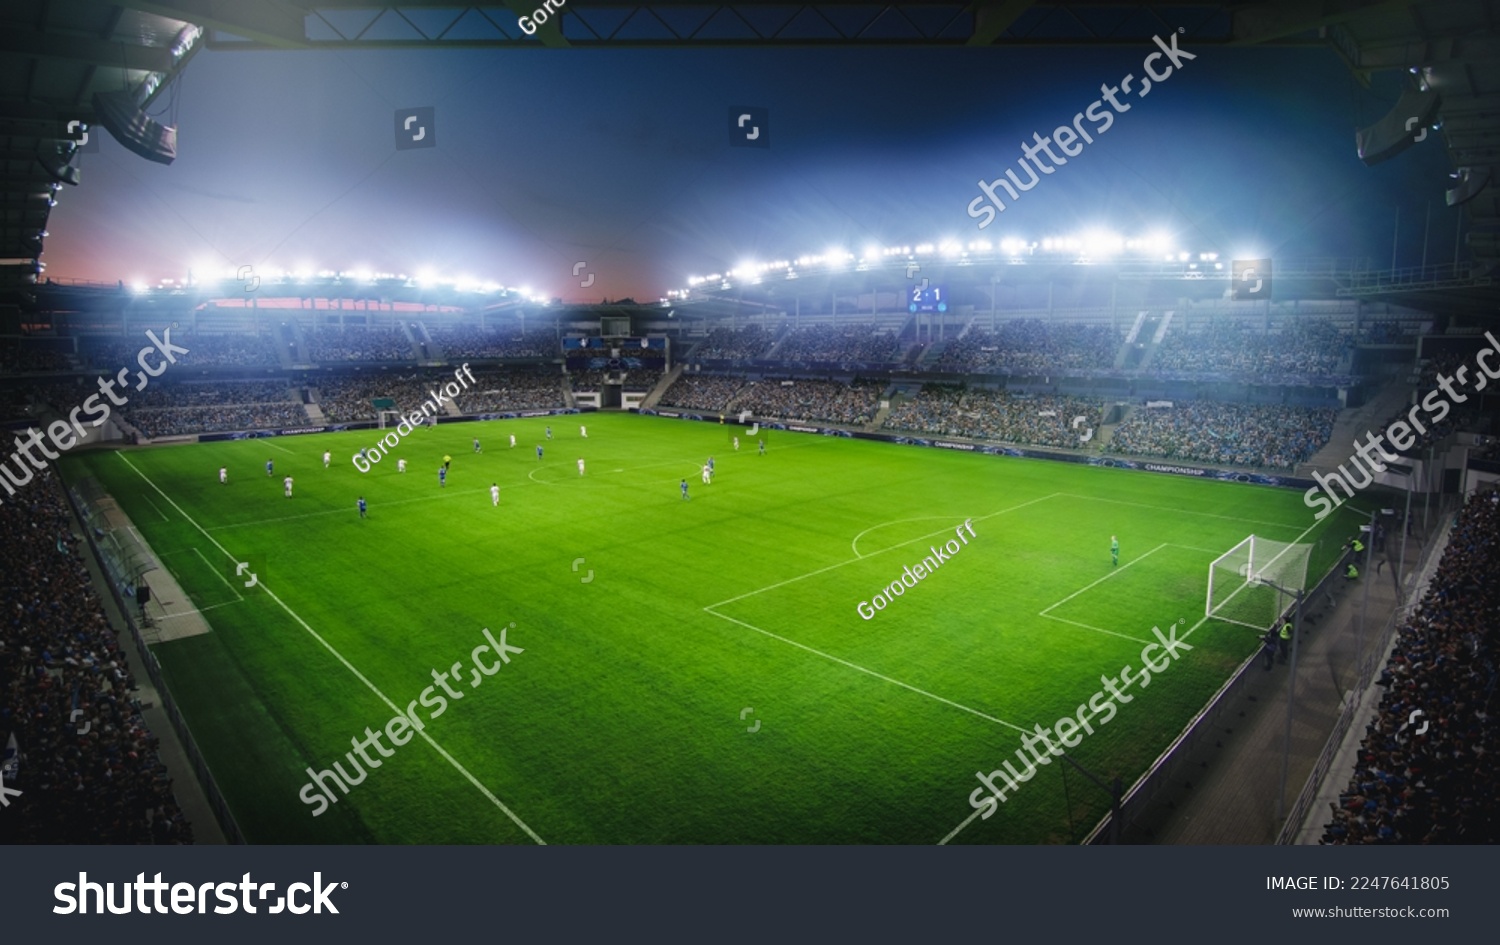 High Angle Establishing Shot: Stadium with Soccer Championship Match. Teams Play, Crowds of Fans Cheer. Football Cup Tournament. Sport Channel Television Concept, Screen Content. Wide Shot. #2247641805